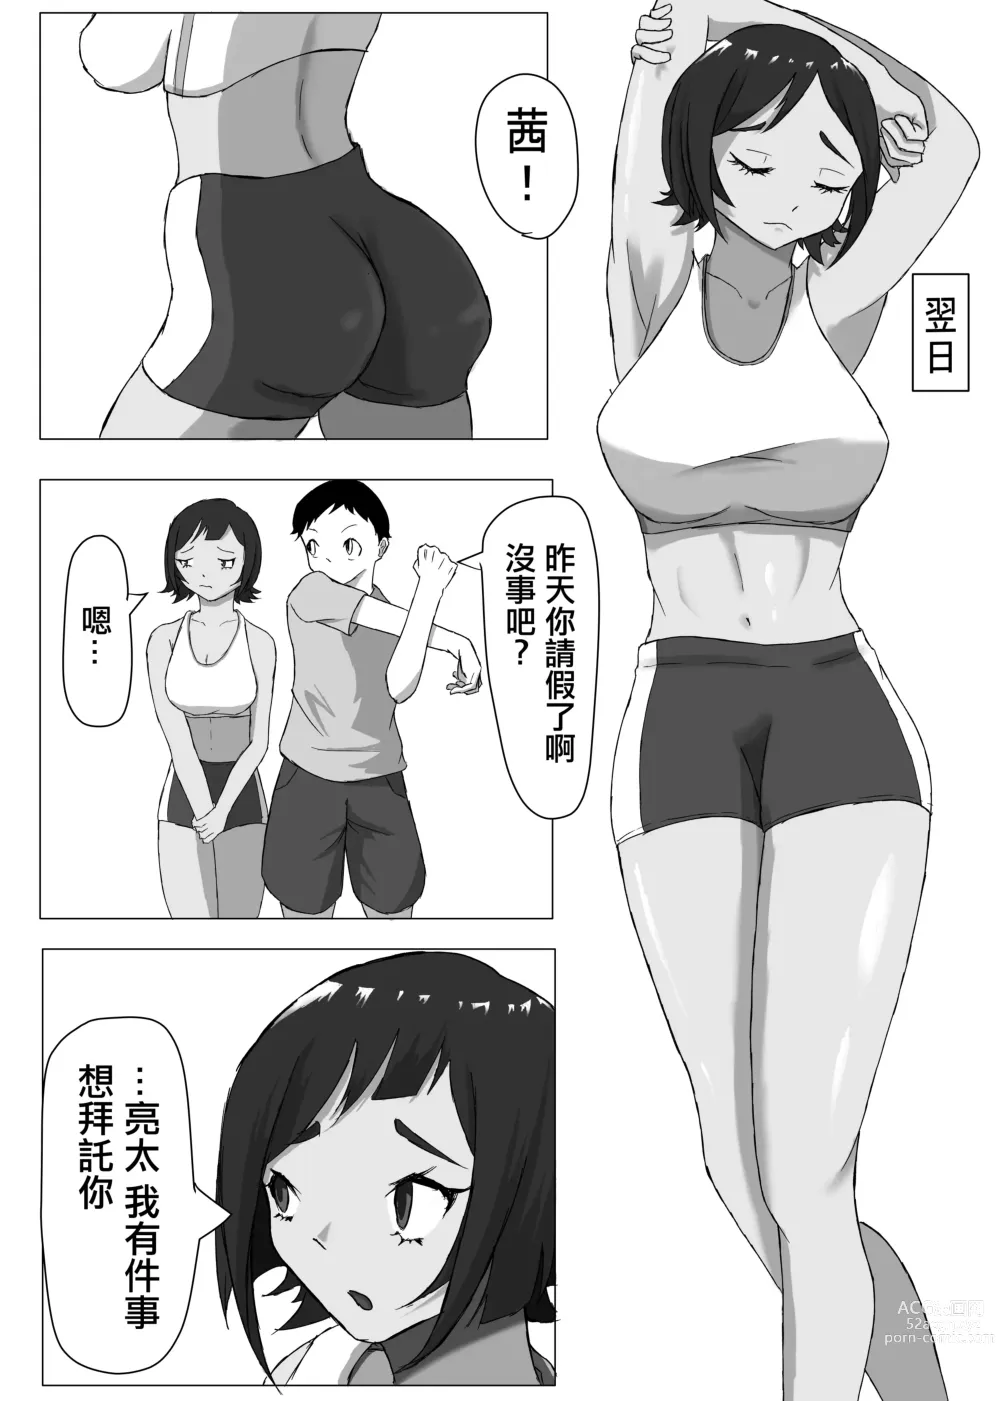 Page 16 of doujinshi 綠帽競爭